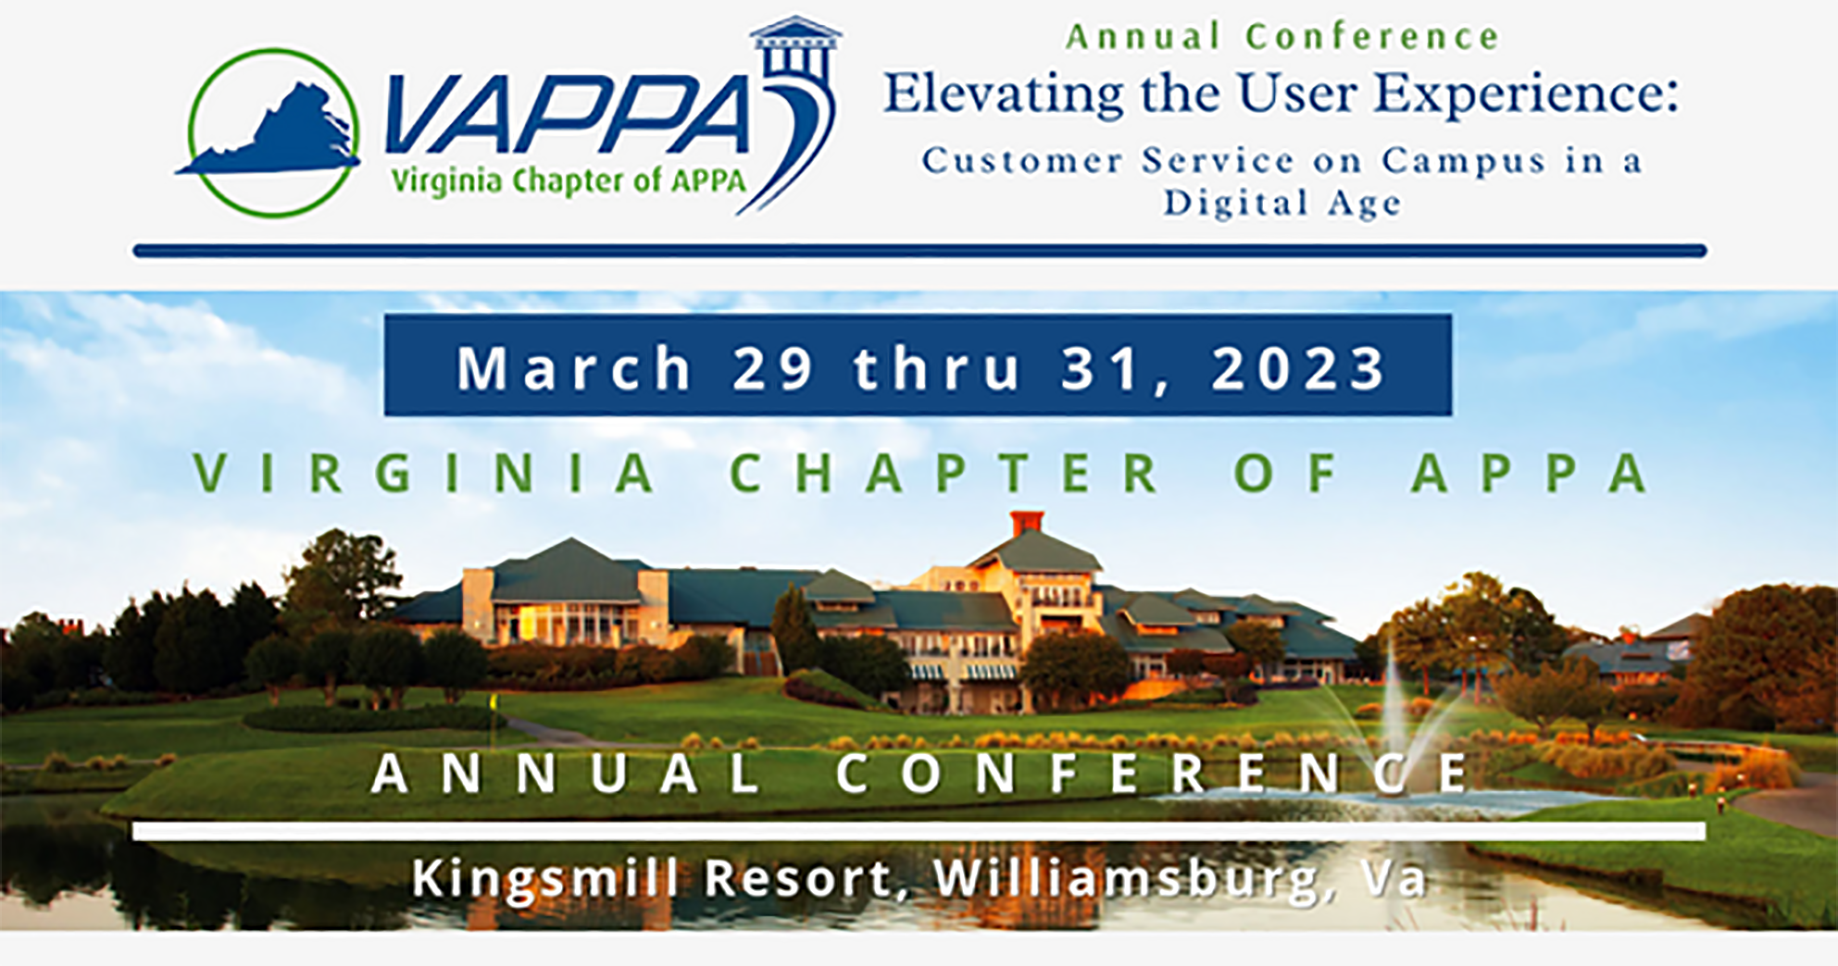 VAPPA-2023-Annual-Conference-Homepage-Image-1 copy